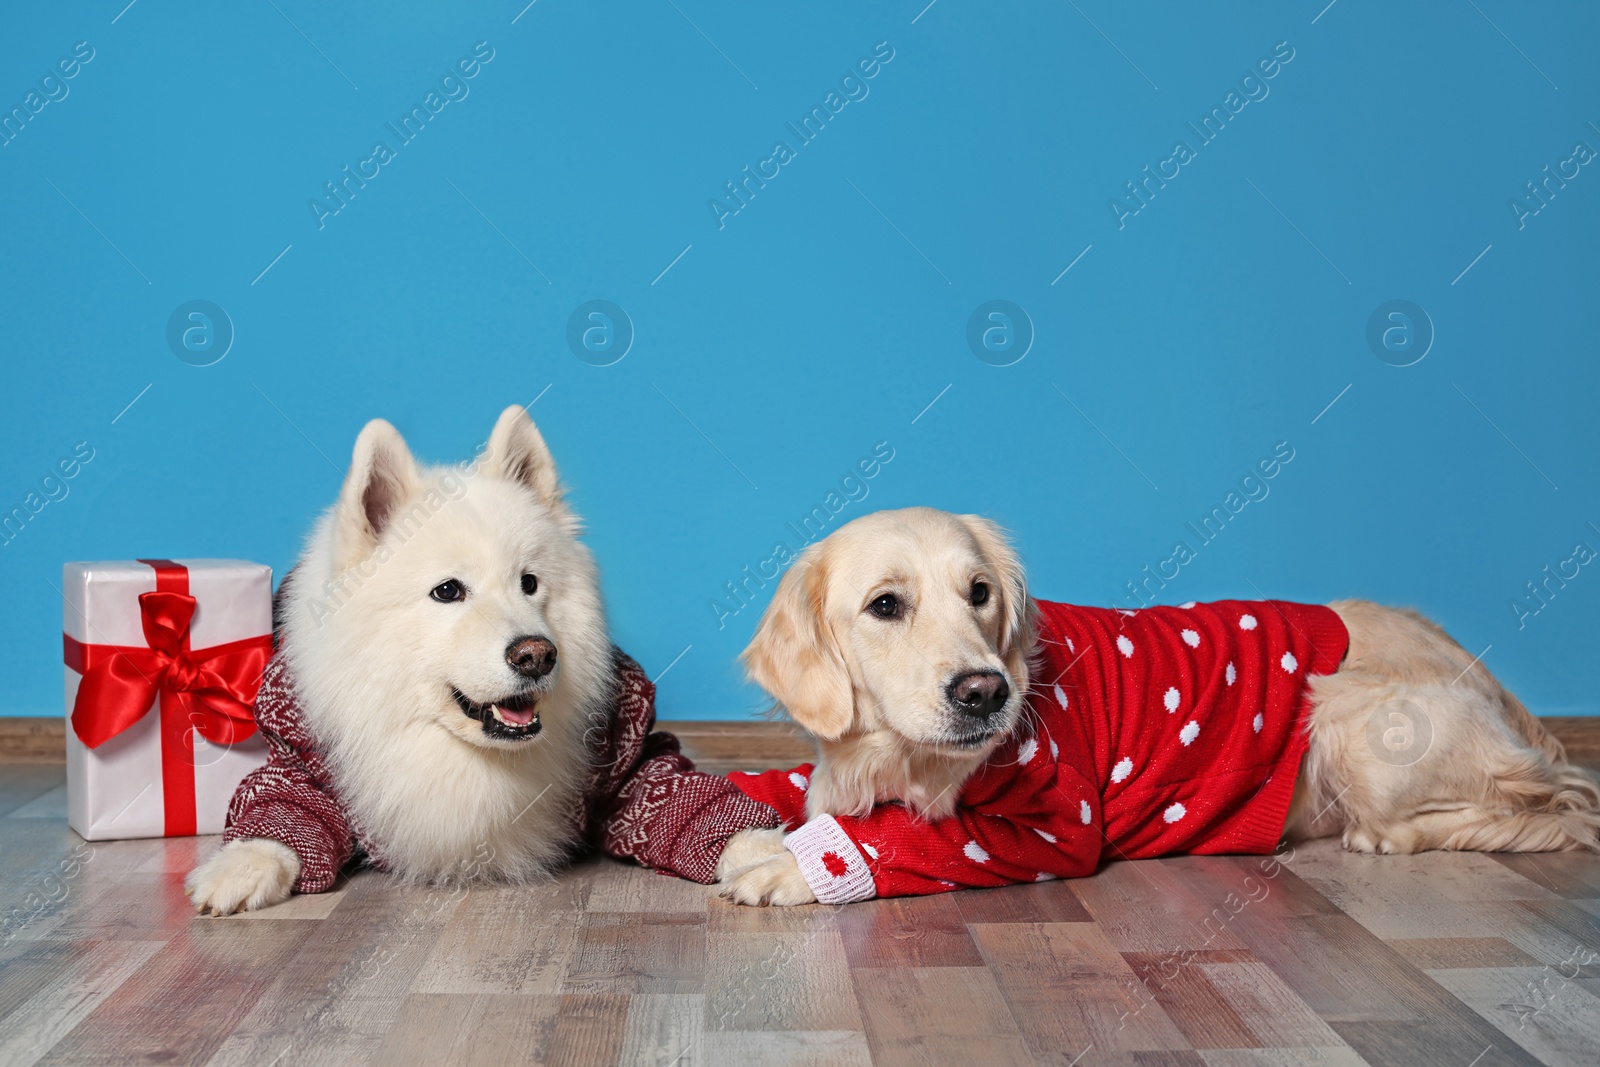 Photo of Cute dogs in warm sweaters and Christmas gift on floor near color wall